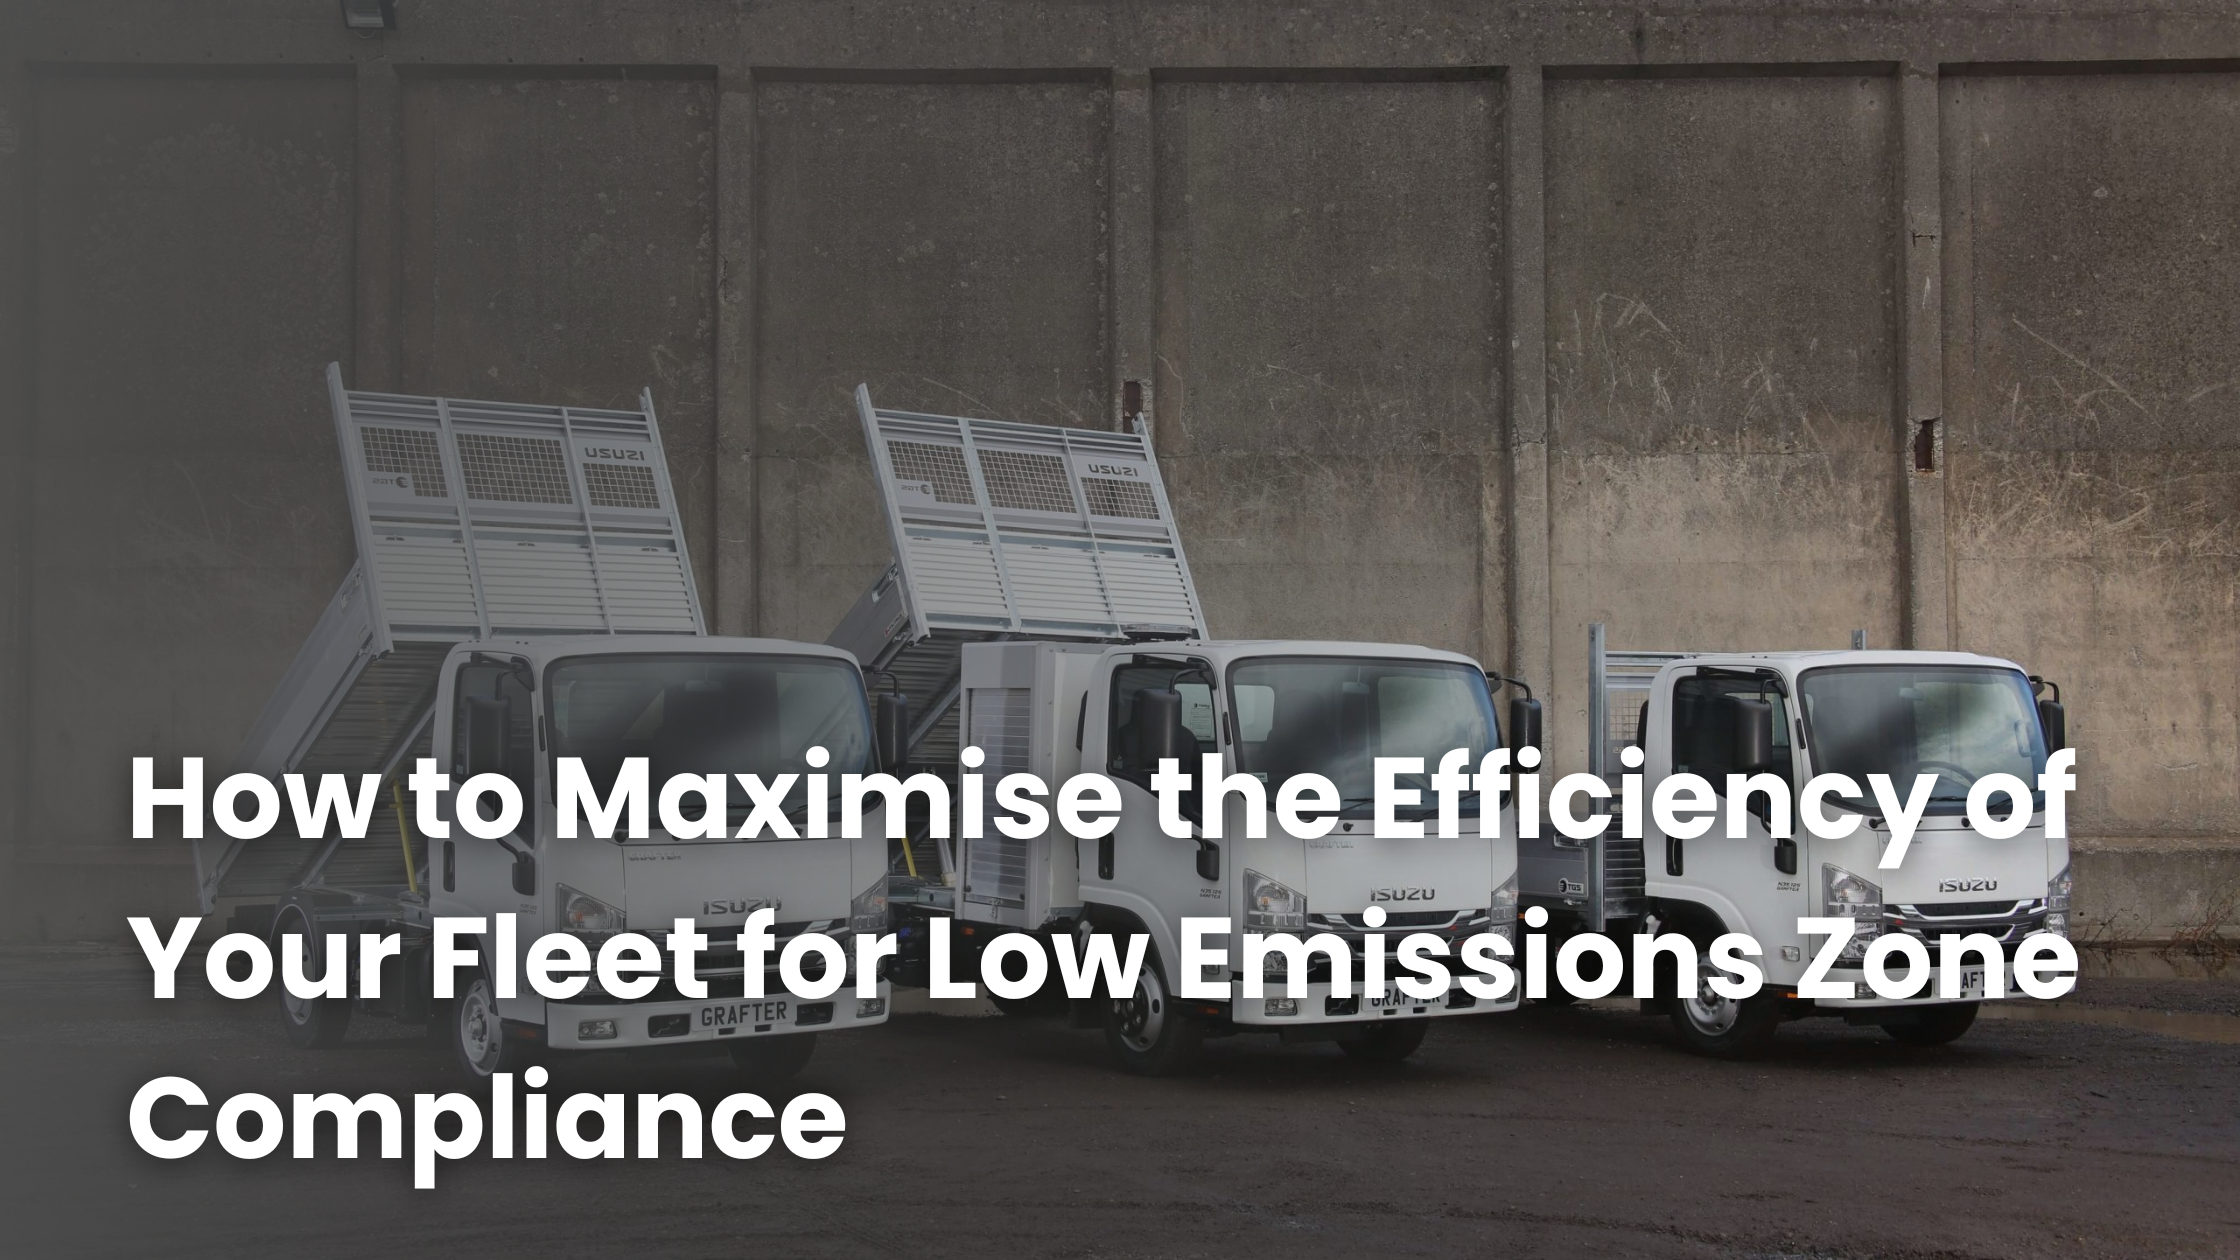 How to Maximise the Efficiency of Your Fleet for Low Emissions Zone Compliance